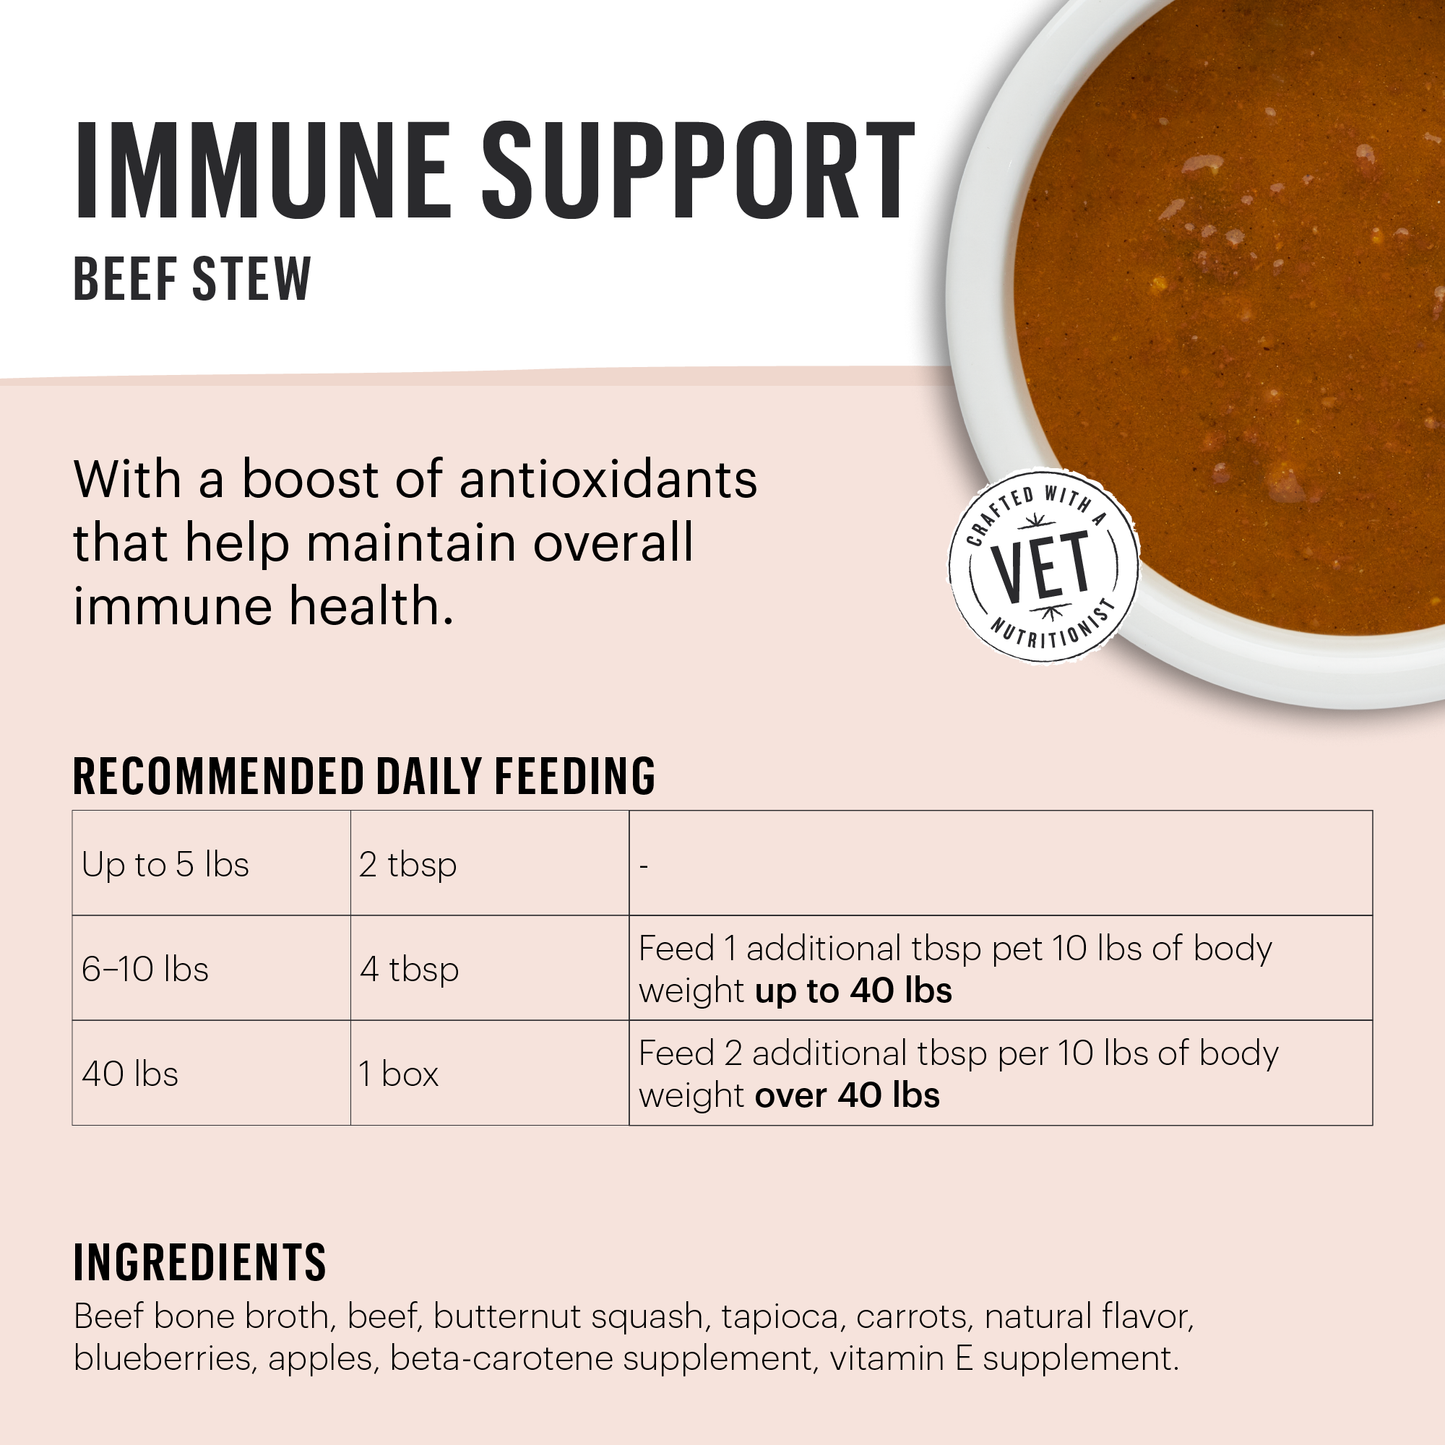 Functional Pour Overs:  Immune Support - Beef Stew